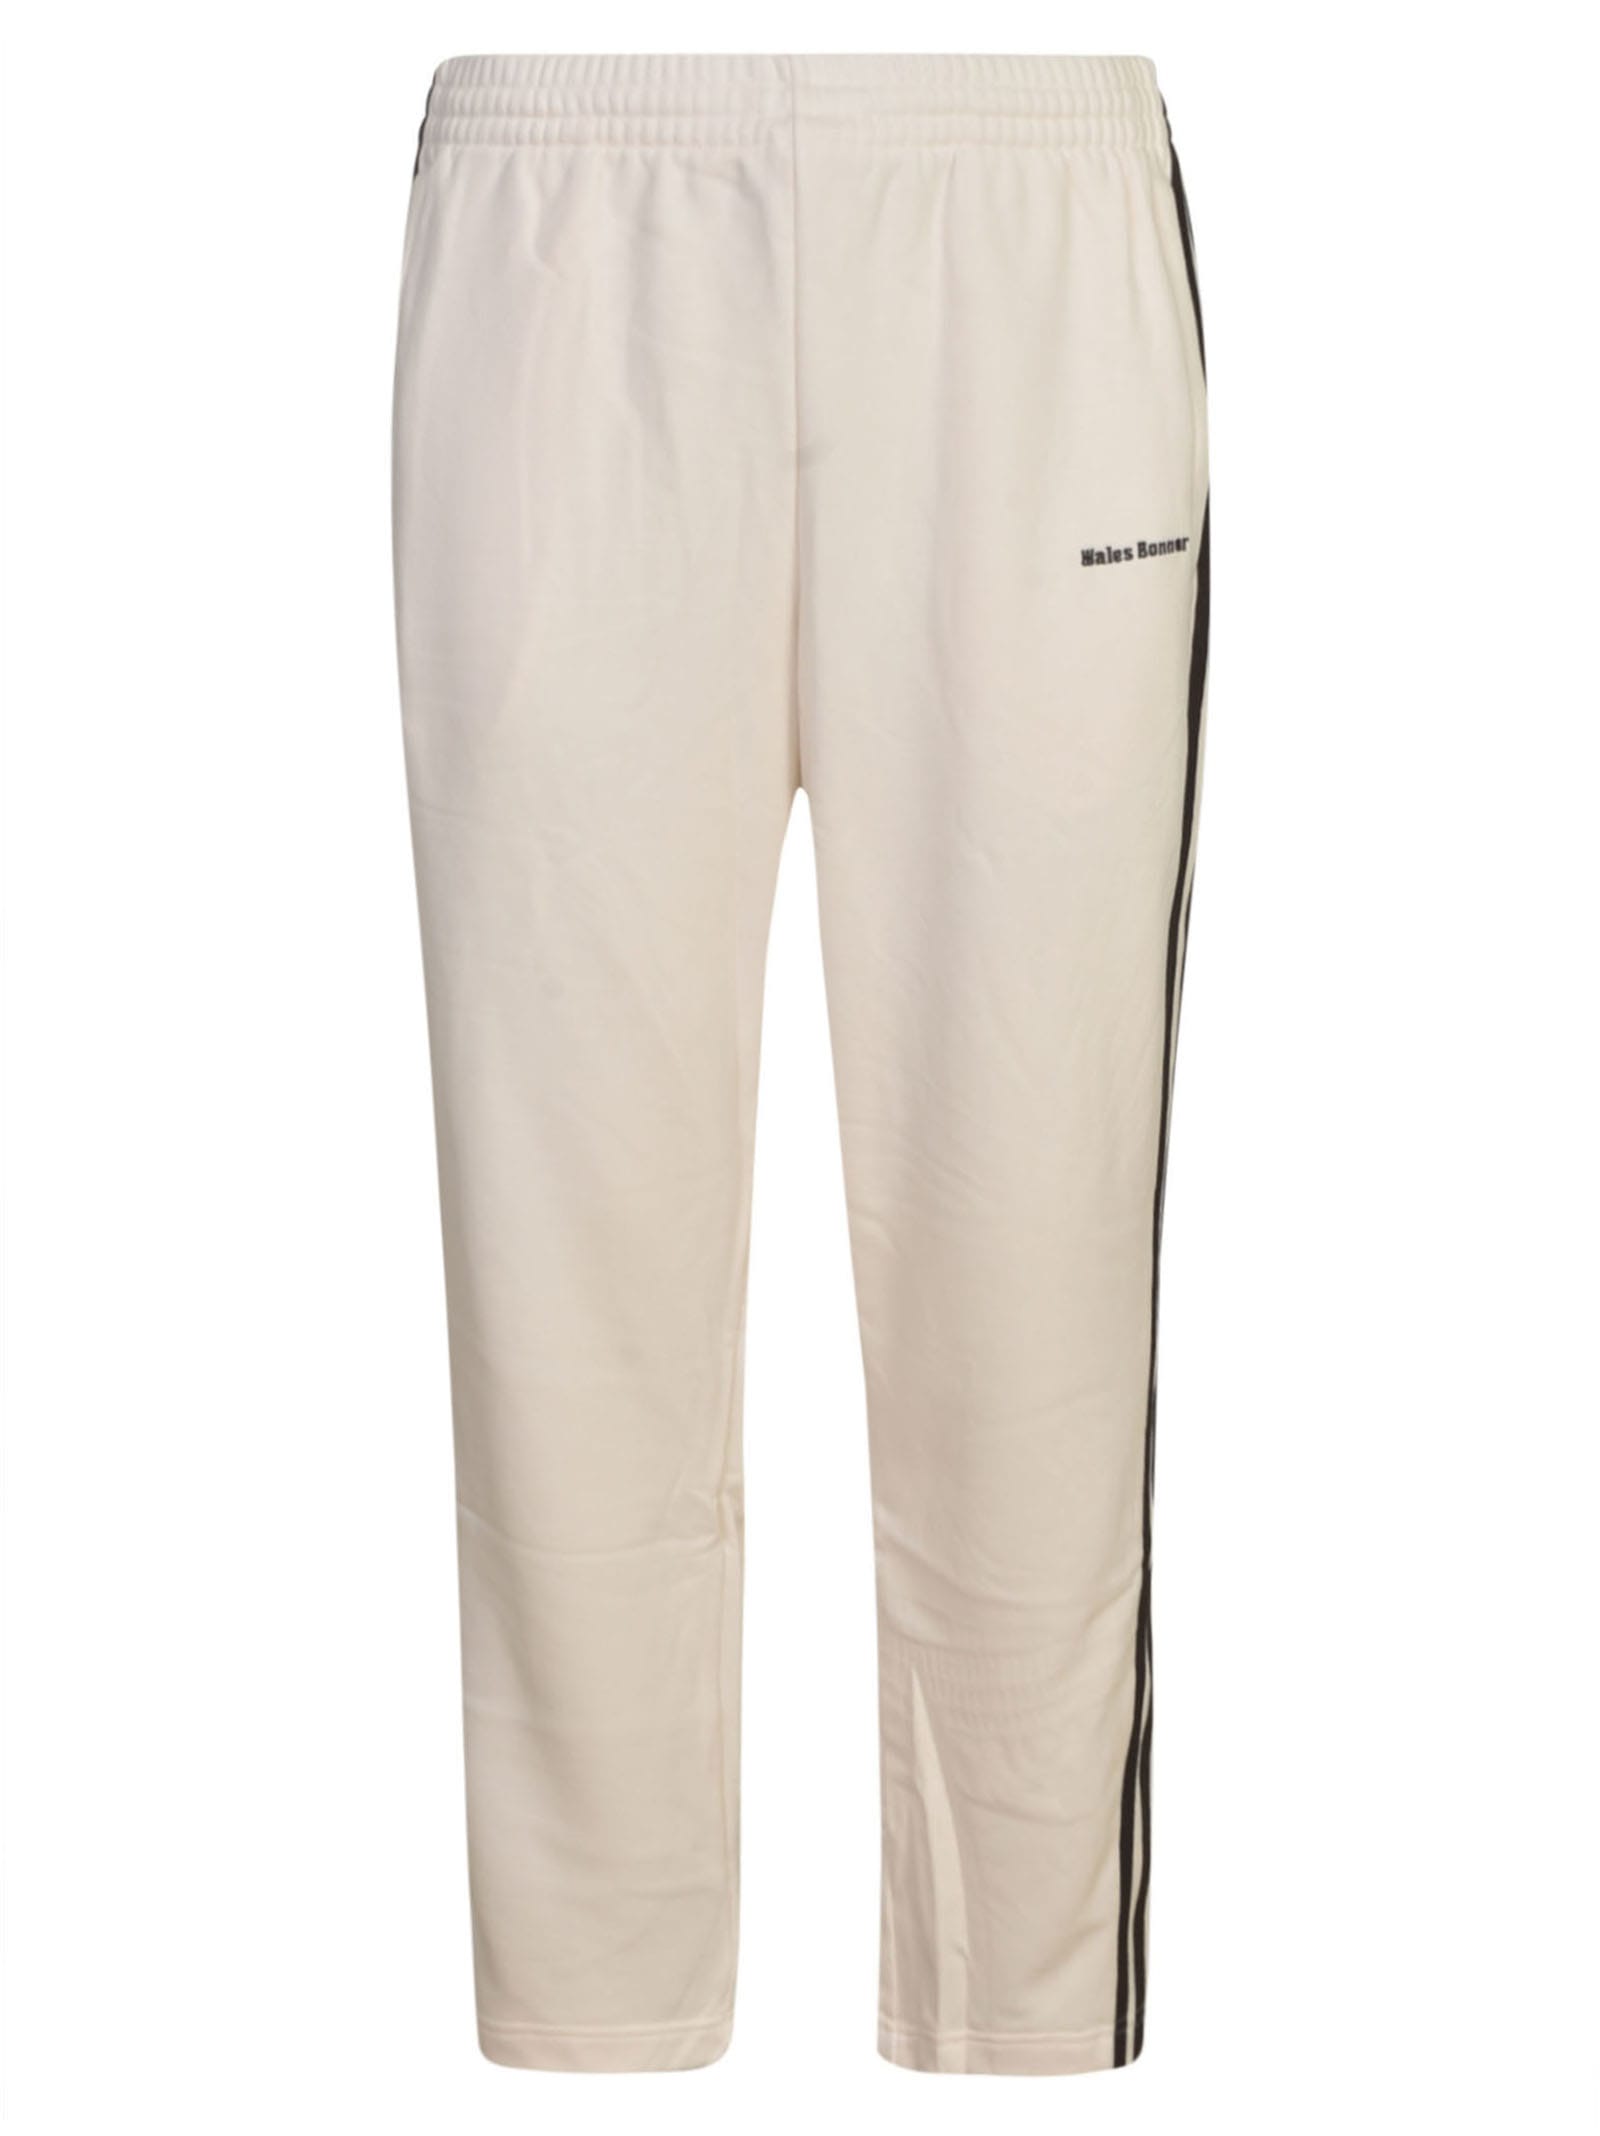 Adidas Originals By Wales Bonner Logo Detail Track Pants In White